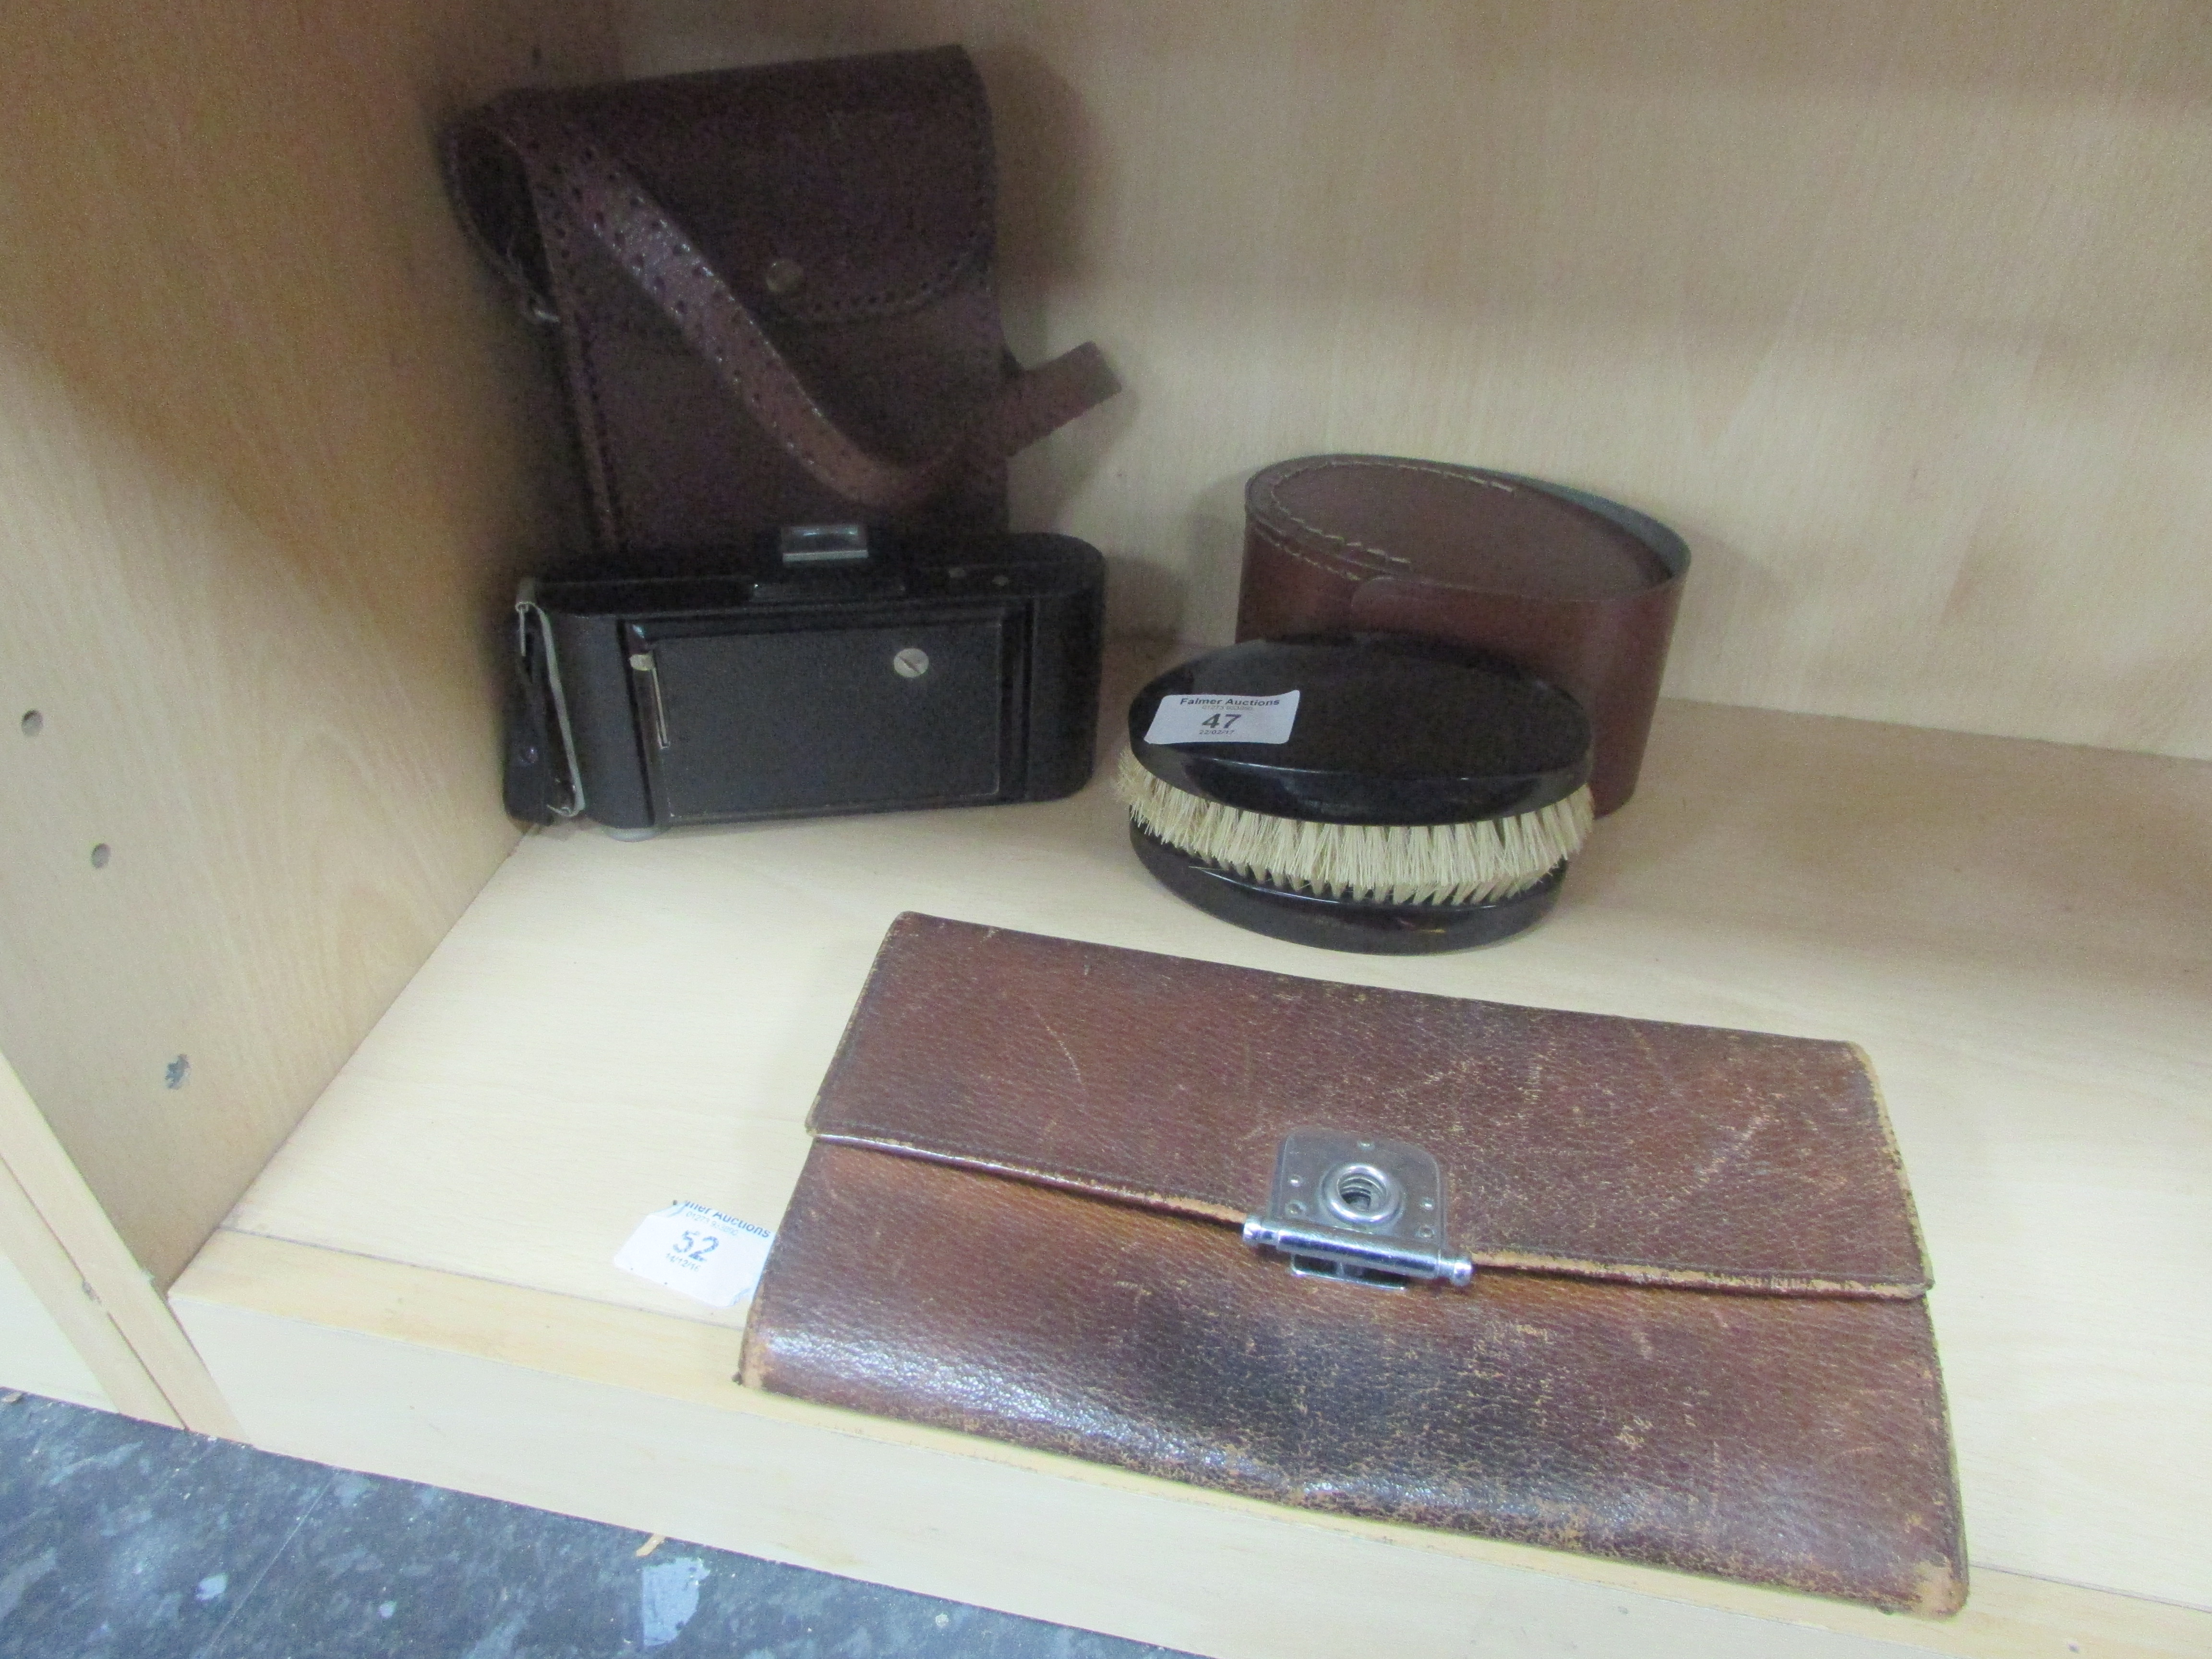 Brush set in leather case / old camera in leather case and leather wallet